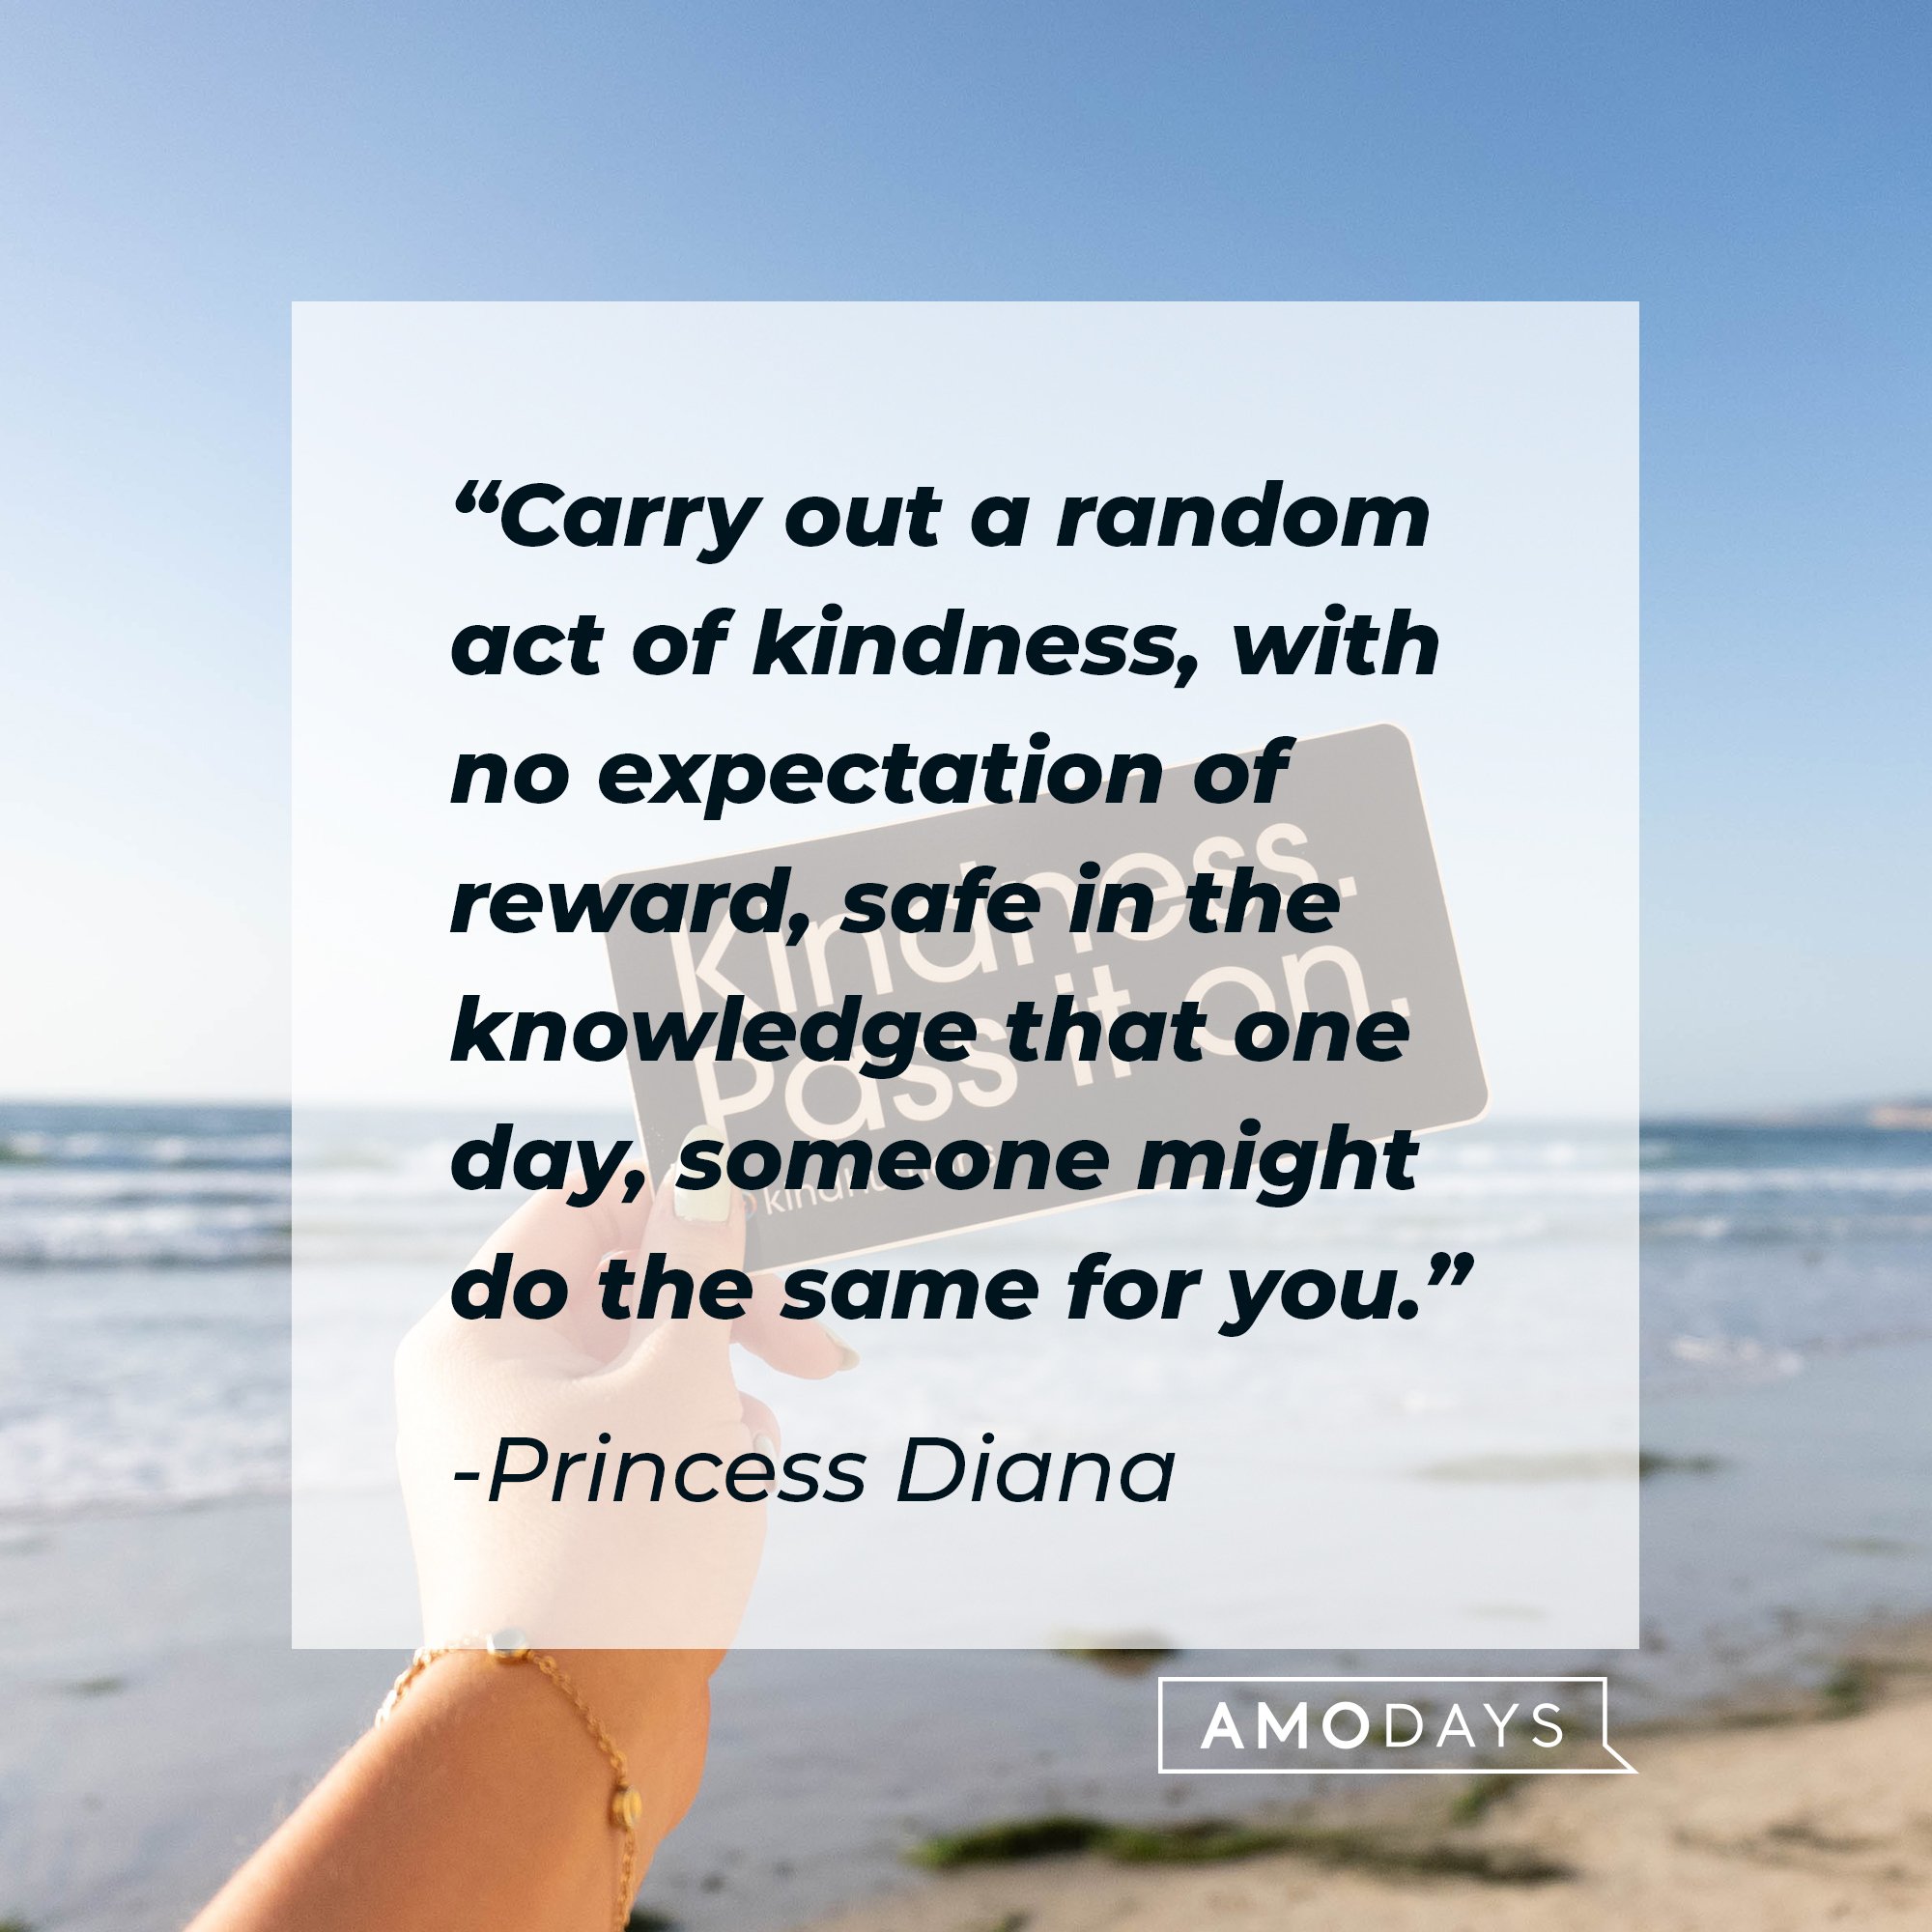 Princess Diana’s quote: "Carry out a random act of kindness, with no expectation of reward, safe in the knowledge that one day, someone might do the same for you." | Image: AmoDays